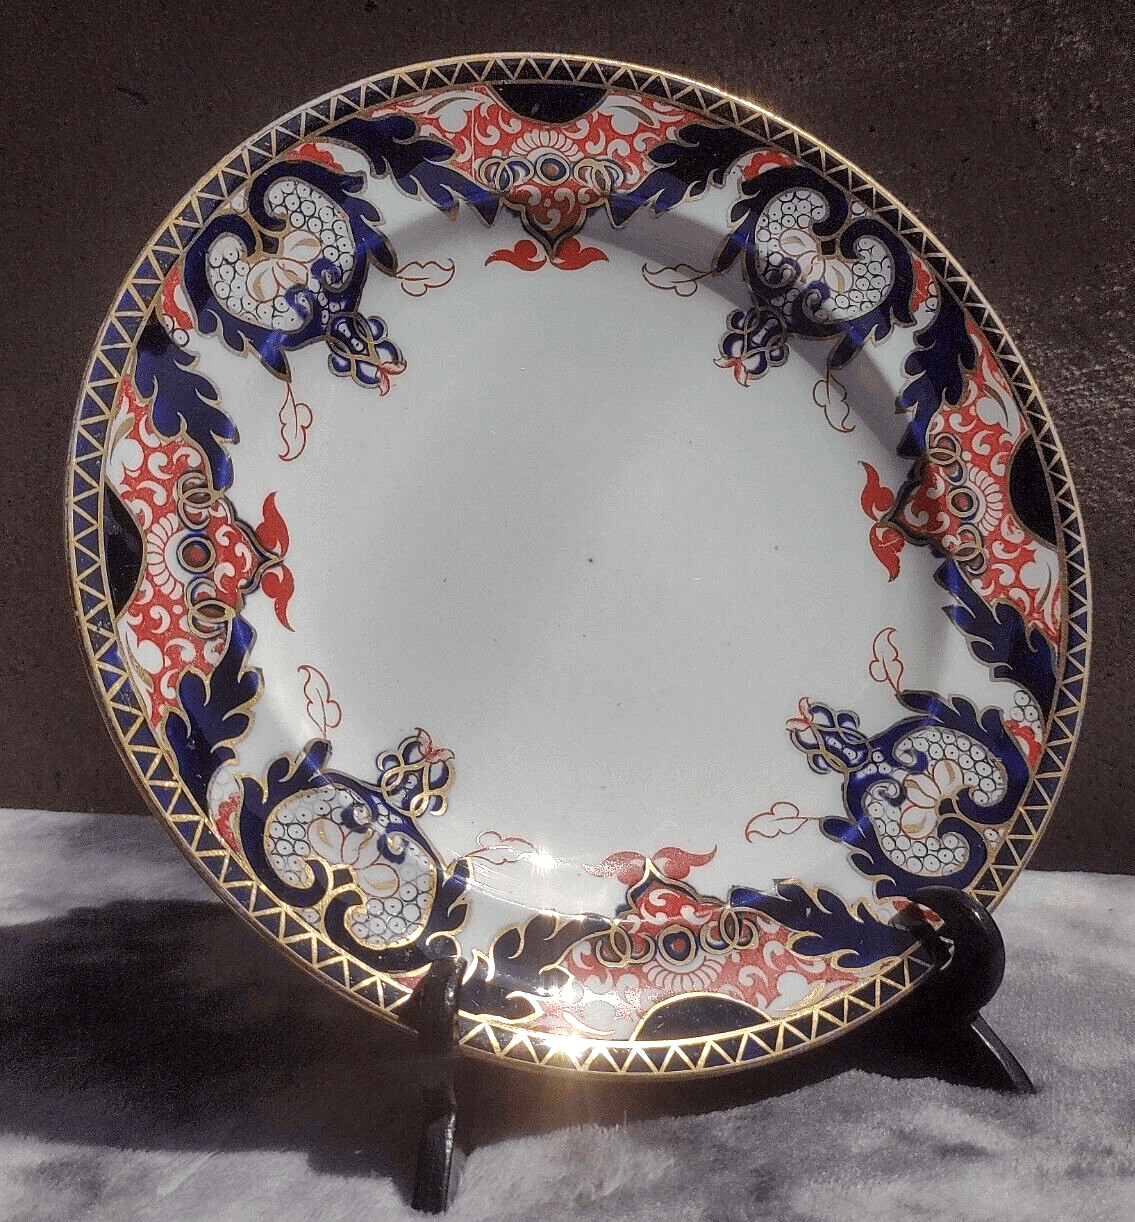 Victorian 19th Century Royal Crown Derby 1270 Imari English Antique Porcelain Plate 9" - Tommy's Treasure